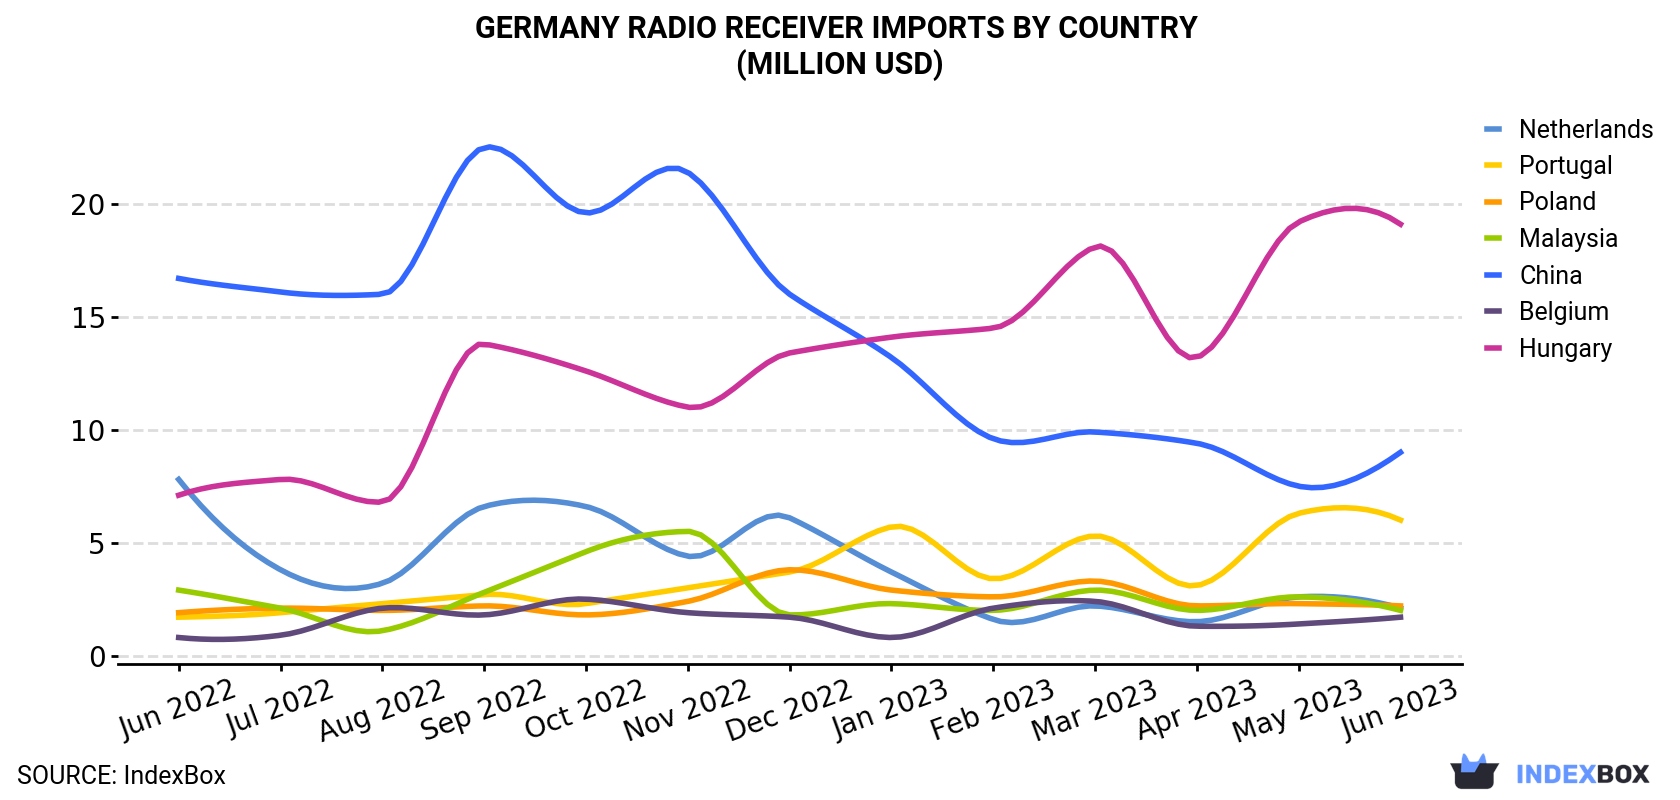 Germany Radio Receiver Imports By Country (Million USD)